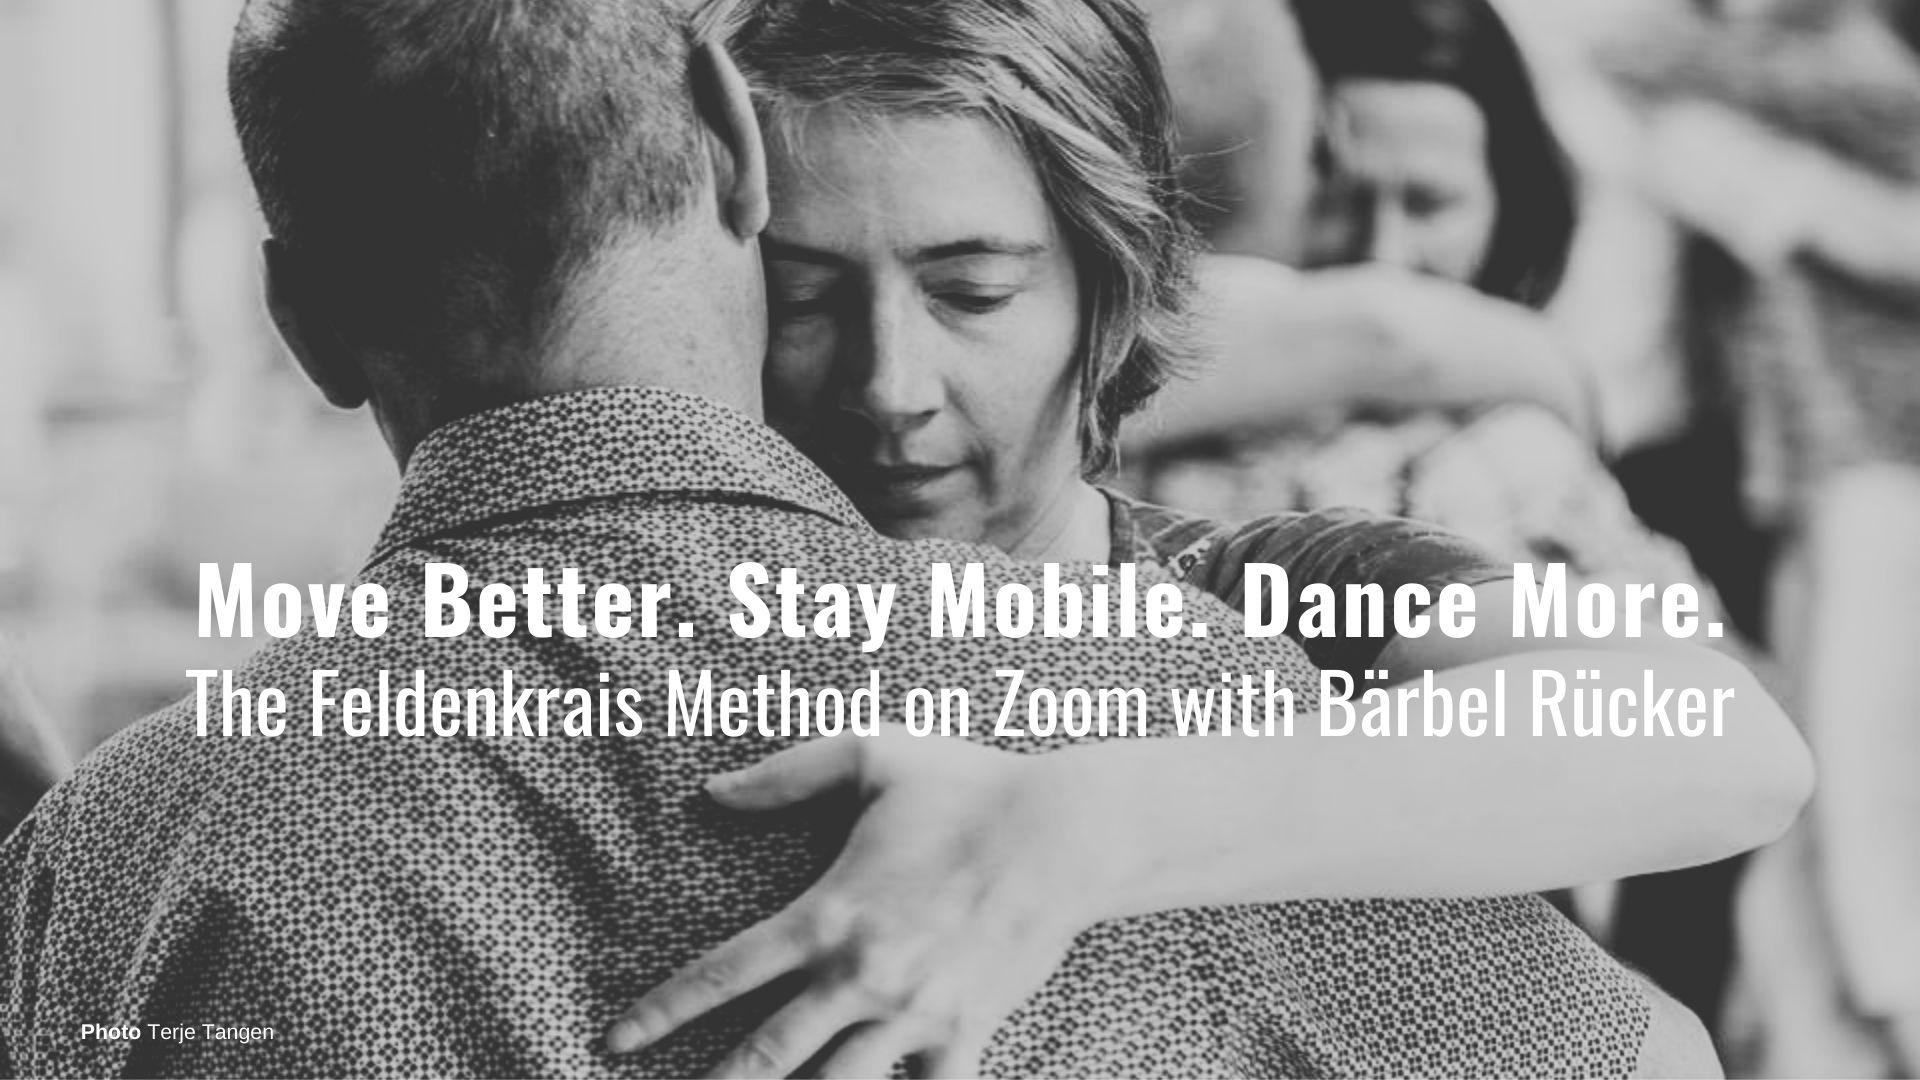 ;ove Better. Stay Mobile. Dance More.